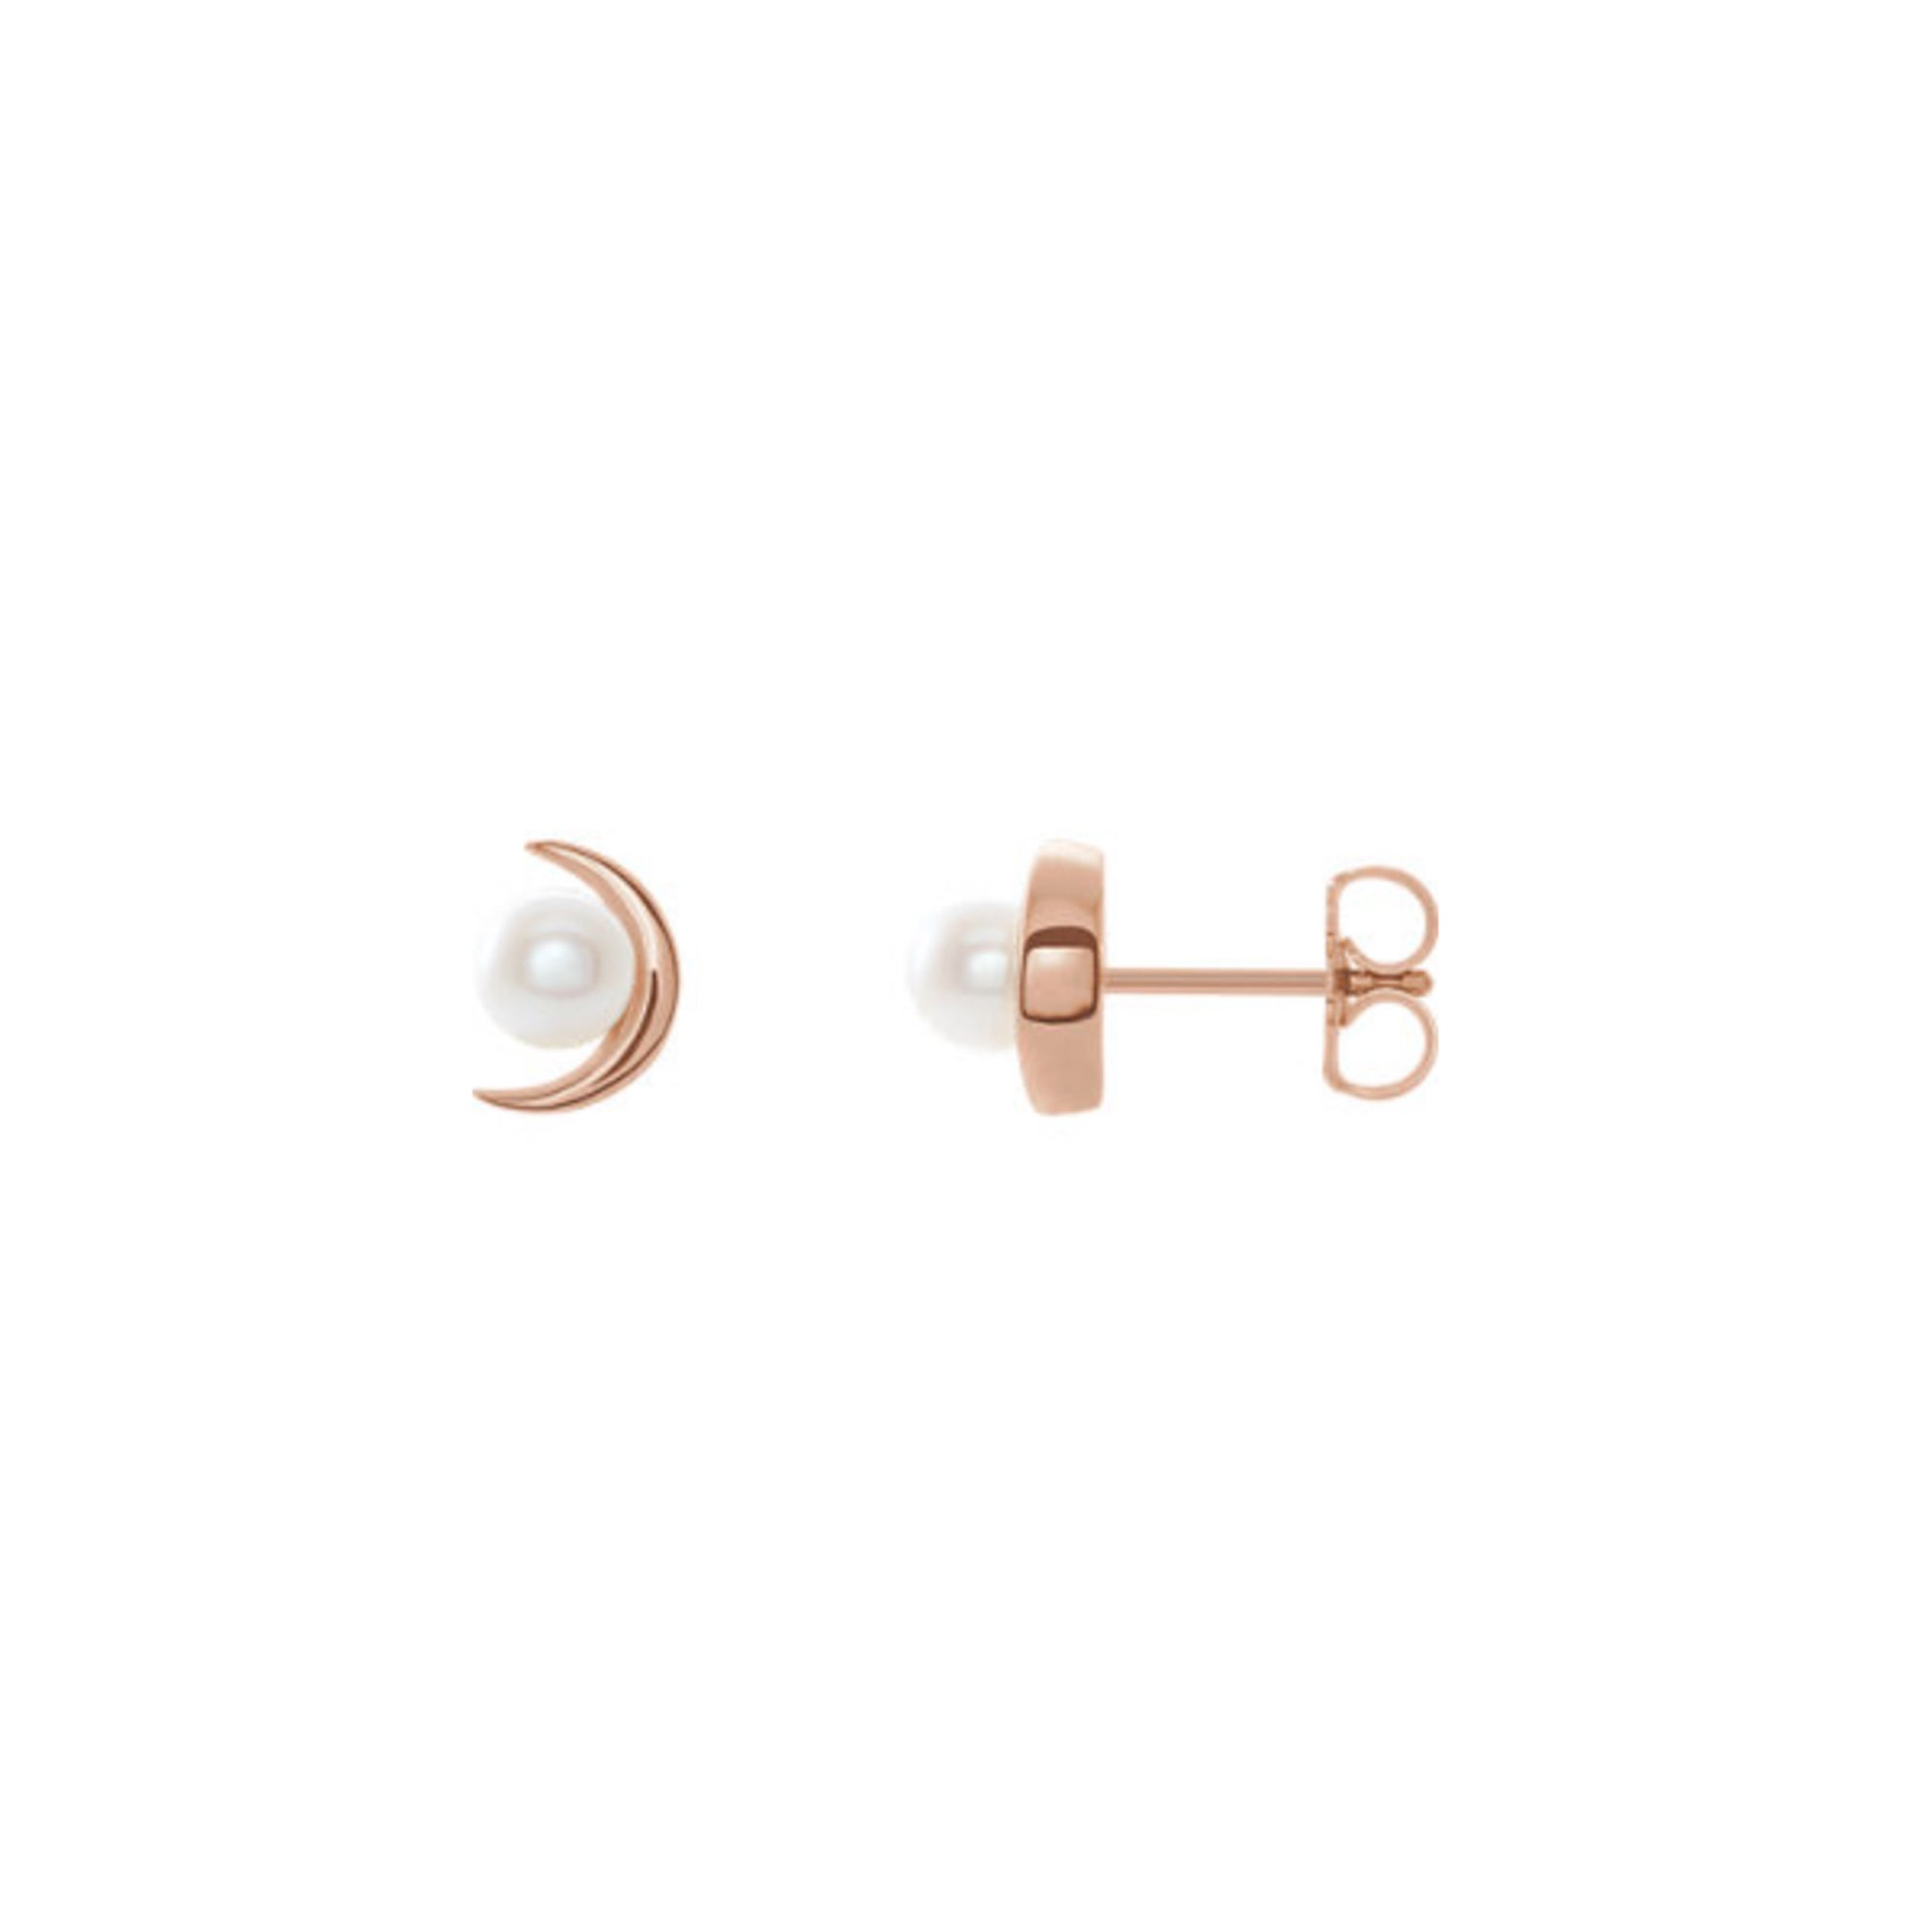 Freshwater Pearl Crescent Moon Earrings in White, Yellow or Rose Gold - Talisman Collection Fine Jewelers